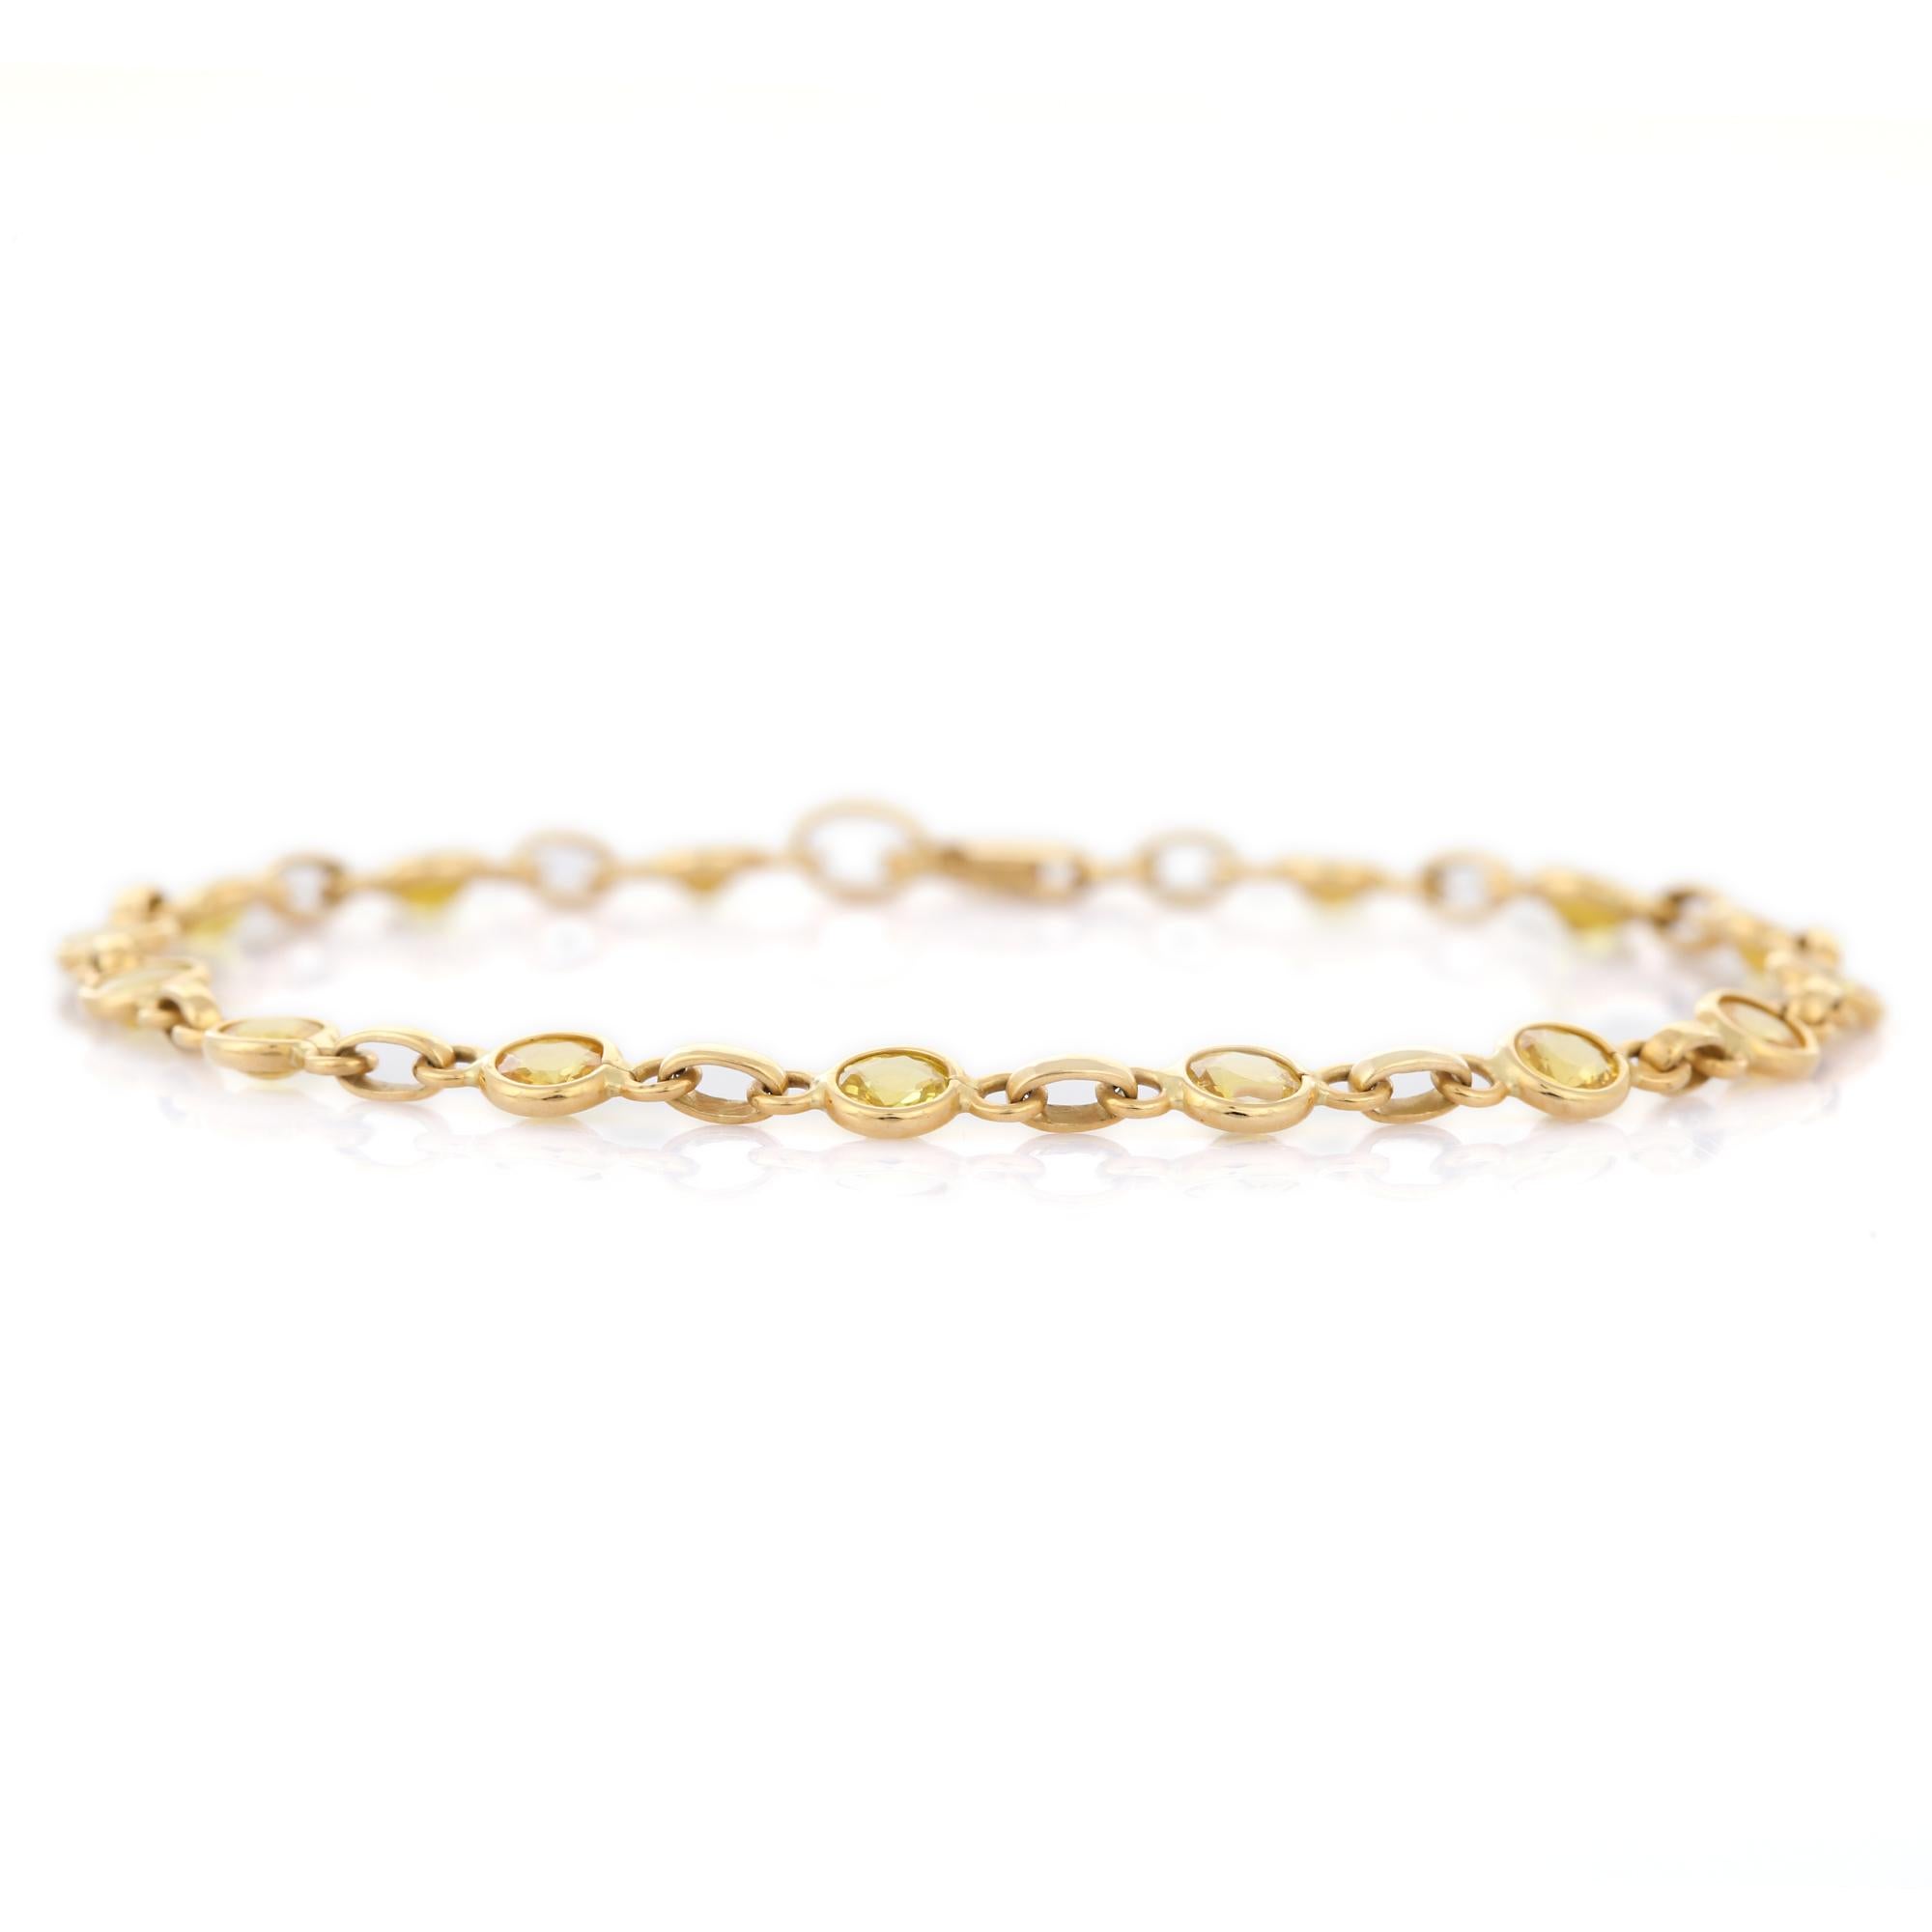 Alluring 4.14 Ct Round Cut Yellow Sapphire Chain Bracelet in 18K Yellow Gold In New Condition For Sale In Houston, TX